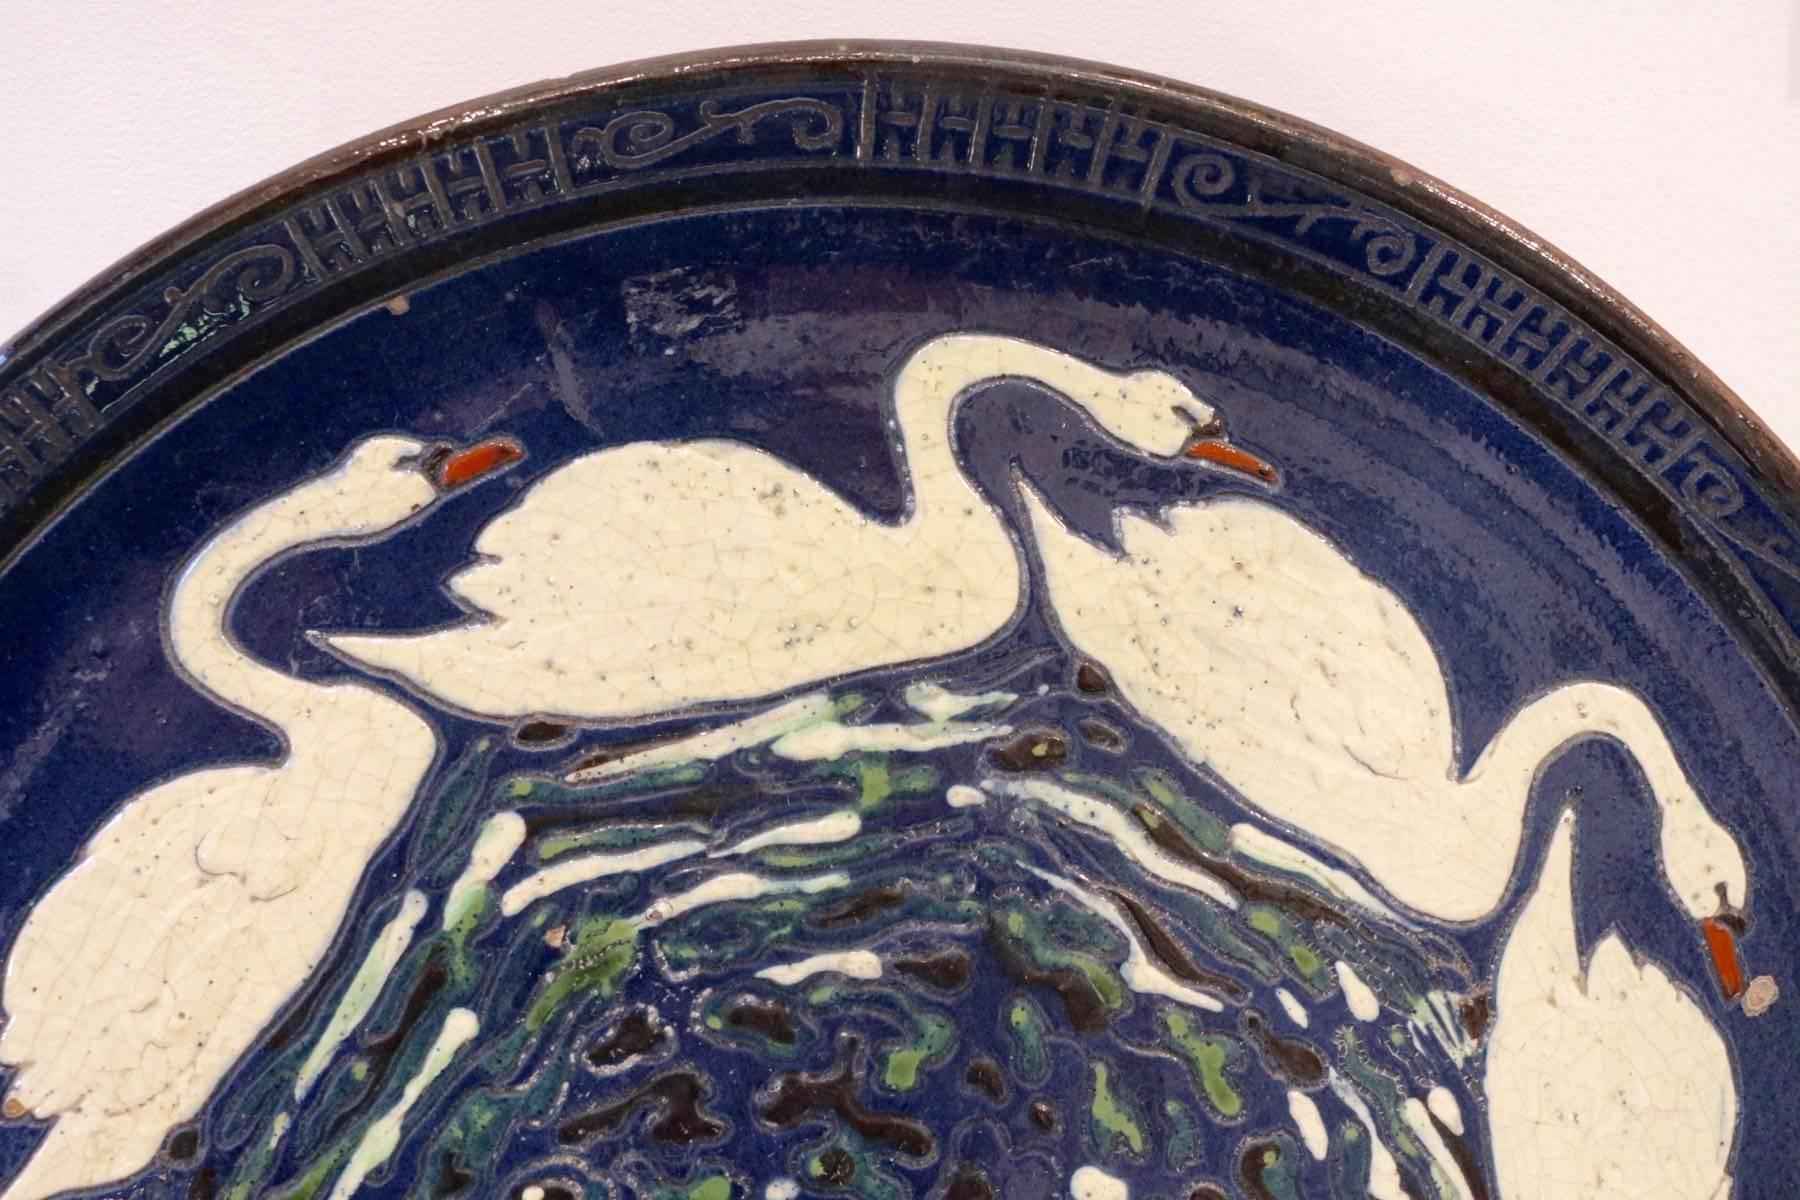 Rare sandstone enameled dish by Paul Jacquet with a Decor of Swans, circa 1915,
Paul Jacquet (1883-1968).

Paul Jacquet was born in Pers on Jussy on 23 June 1883. After a happy childhood, he became a teacher, like his father, while preparing the